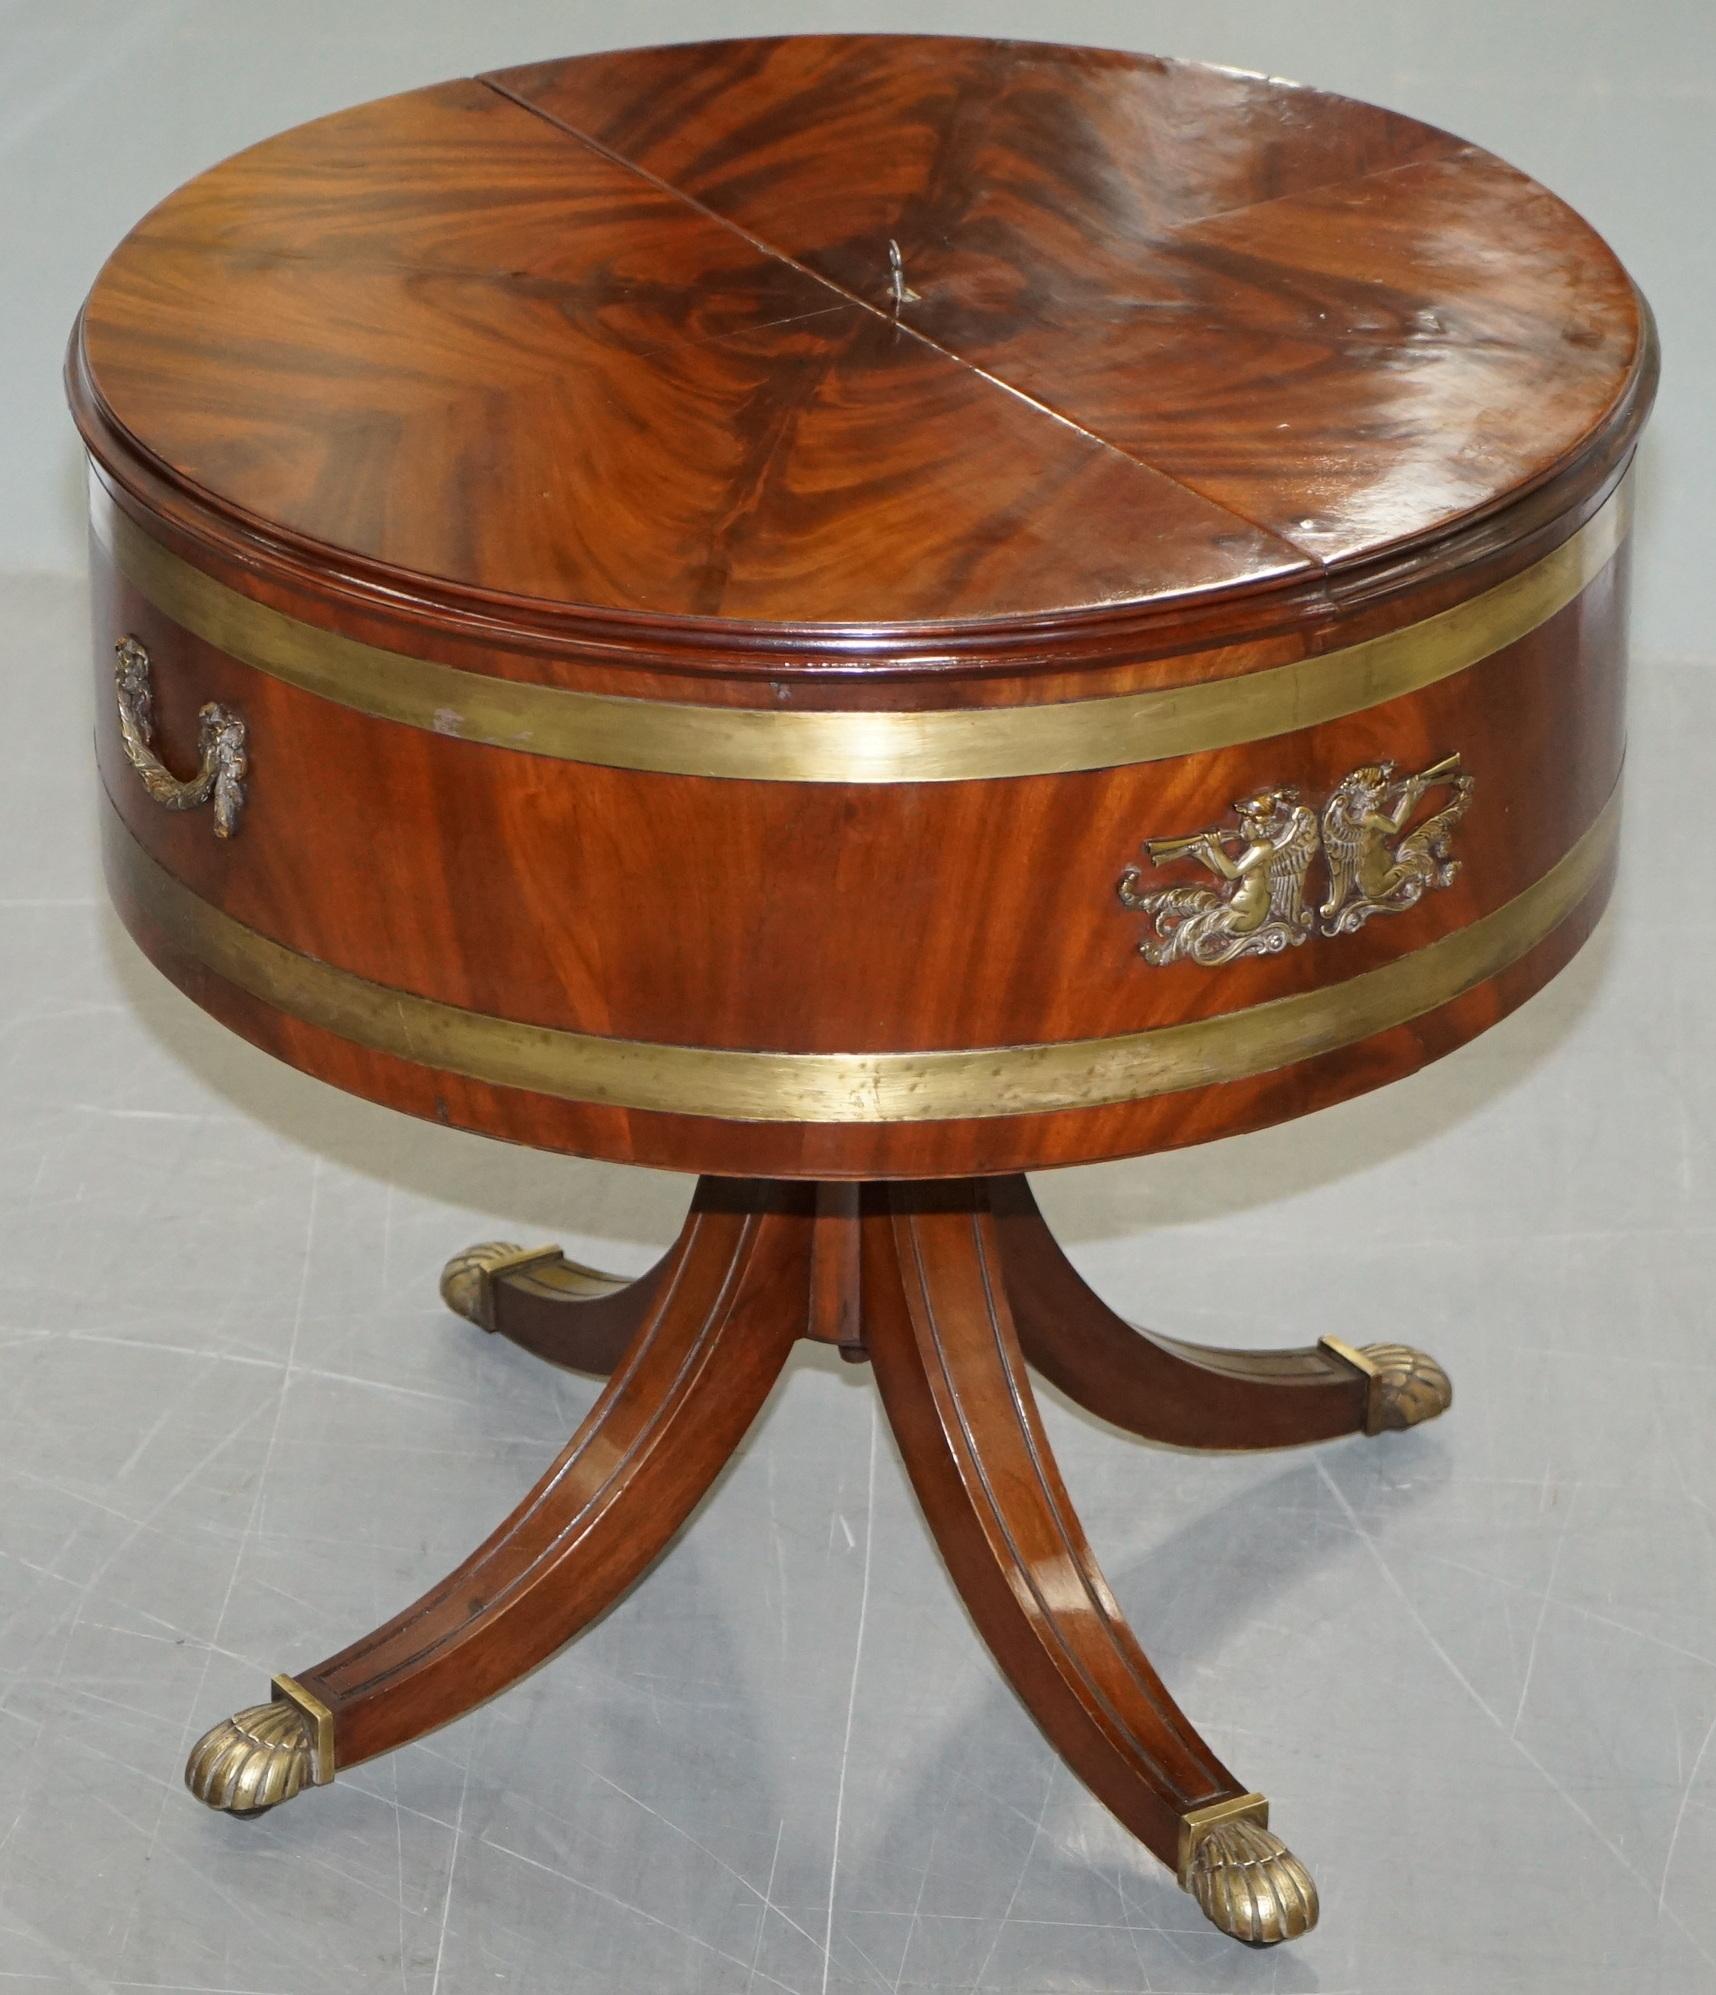 We are delighted to offer for sale this really quite rare restored Regency Empire Mahogany with original bronze fittings and brass trim drum side table with hidden drinks cabinet

A really very good looking antique piece in period fully restored